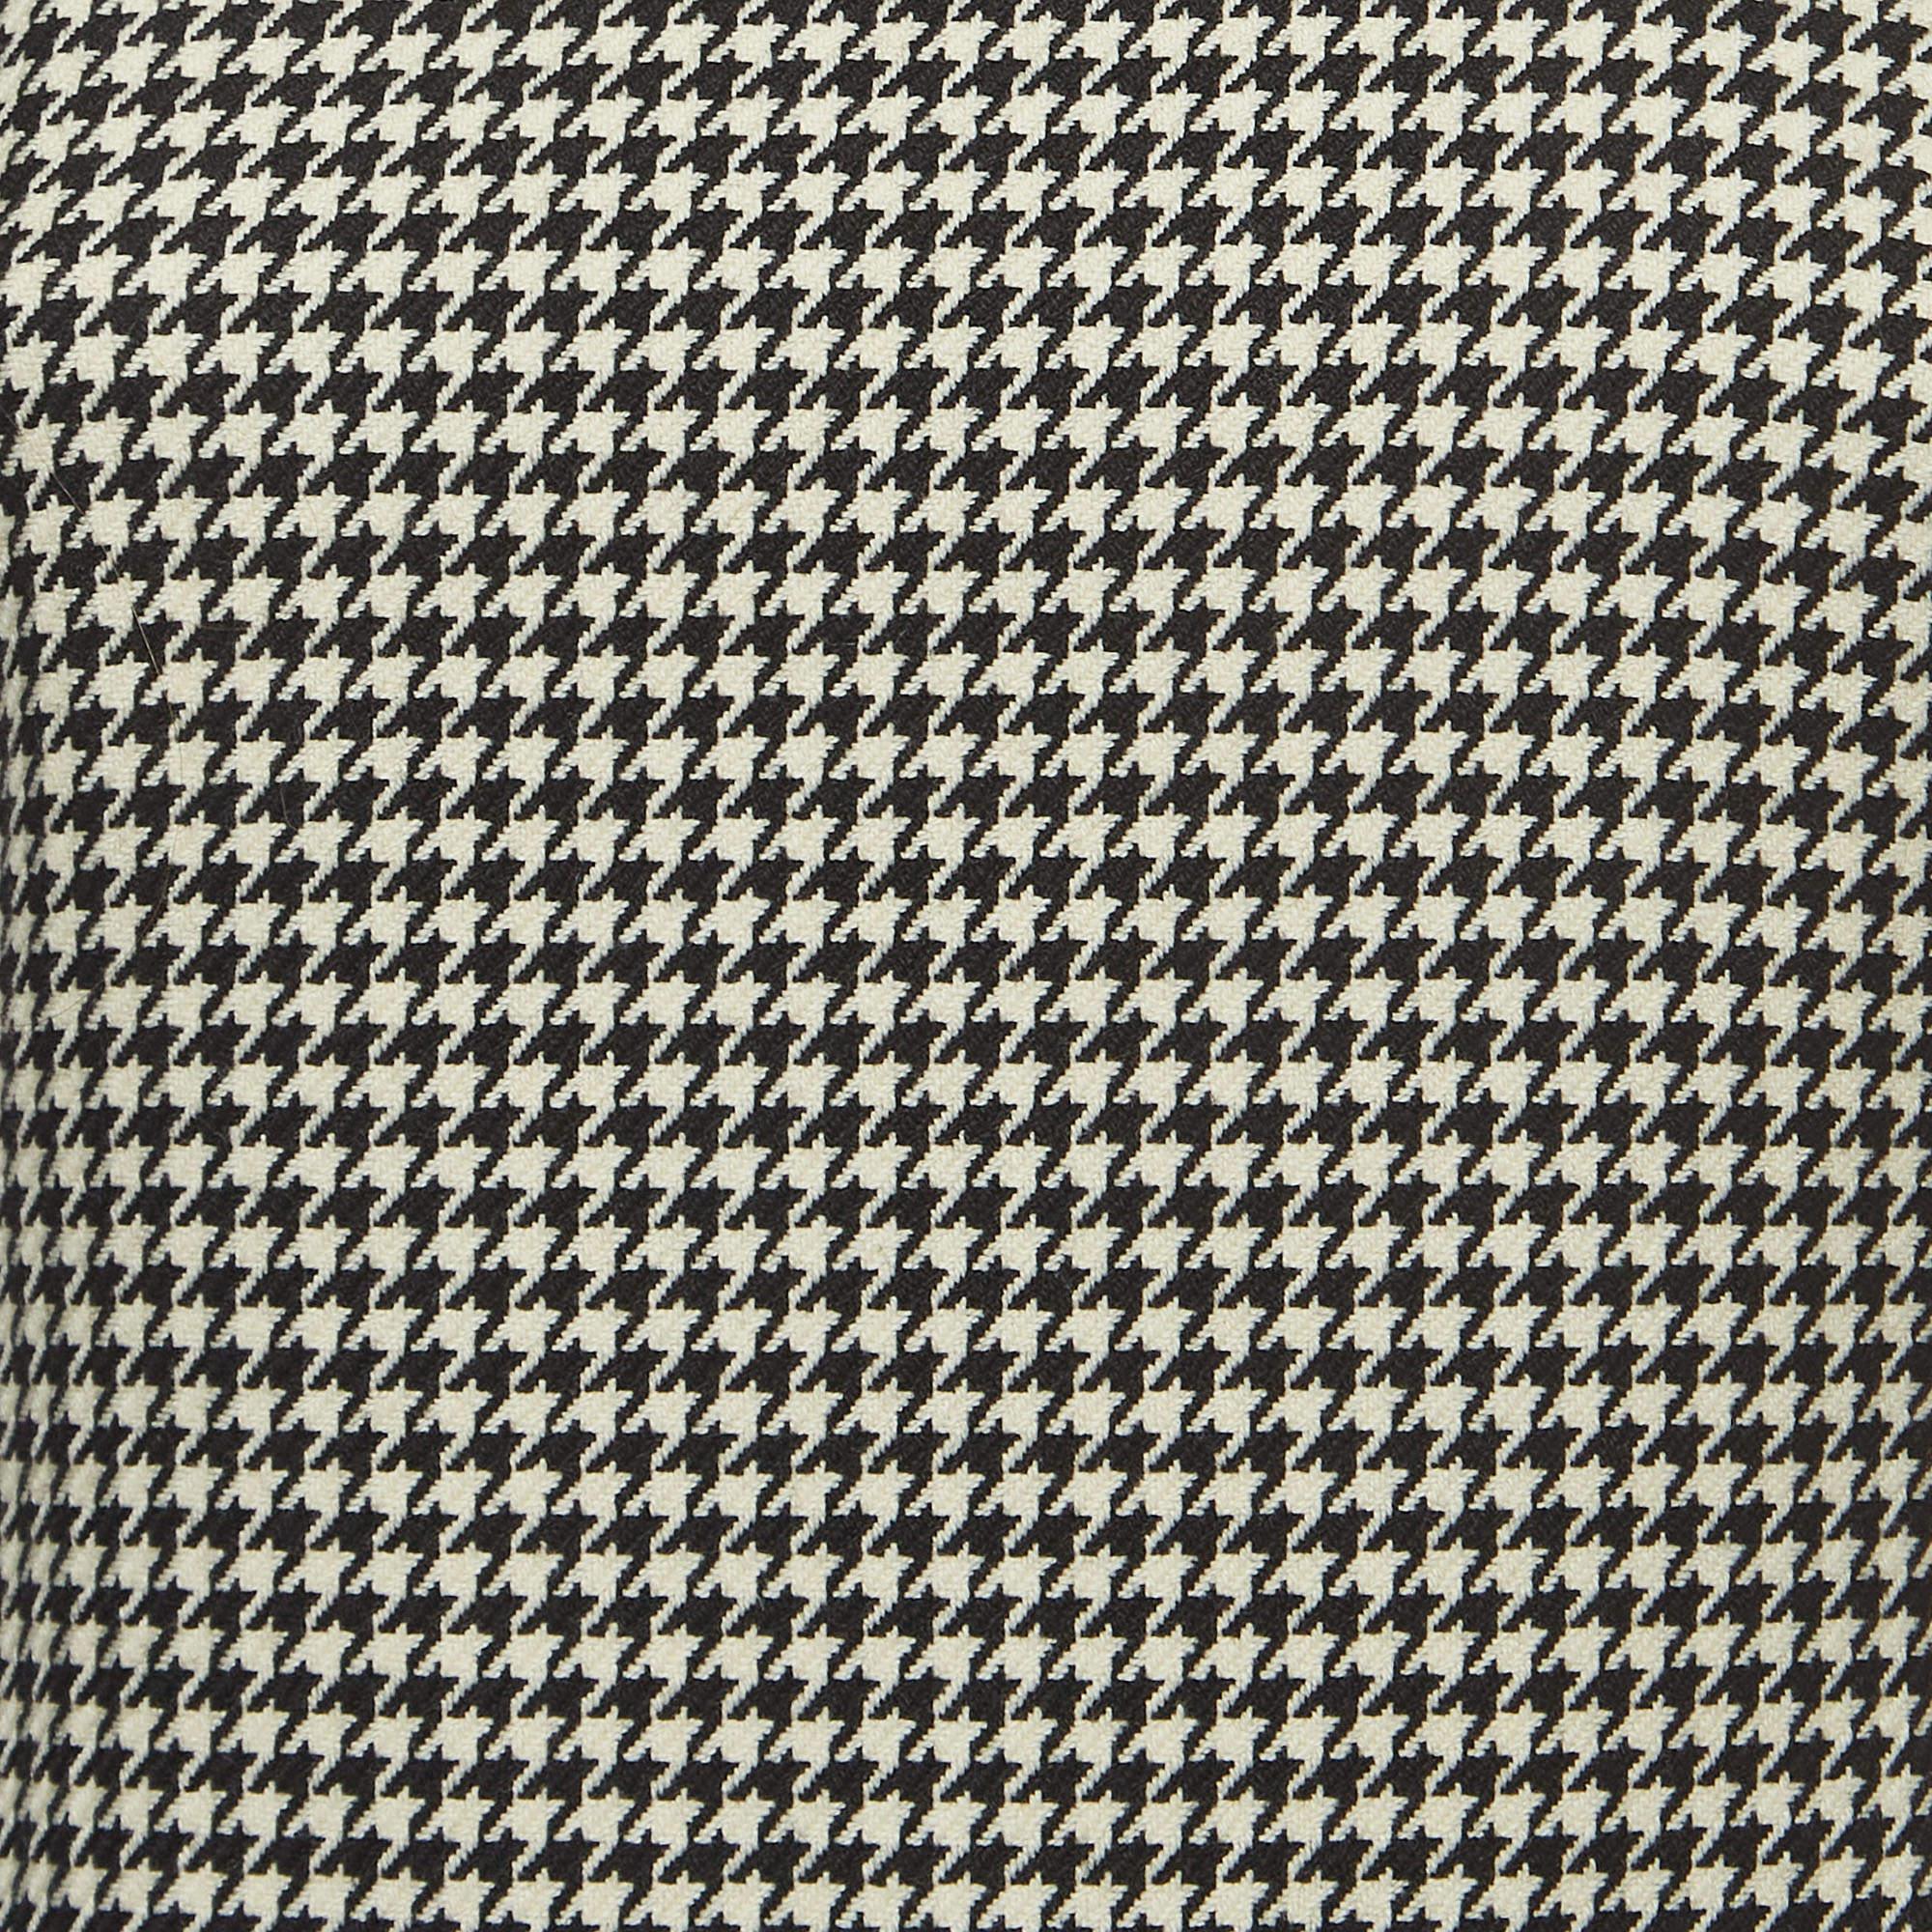 Ralph Lauren Black/White Houndstooth Patterned Wool Short Dress S In New Condition For Sale In Dubai, Al Qouz 2